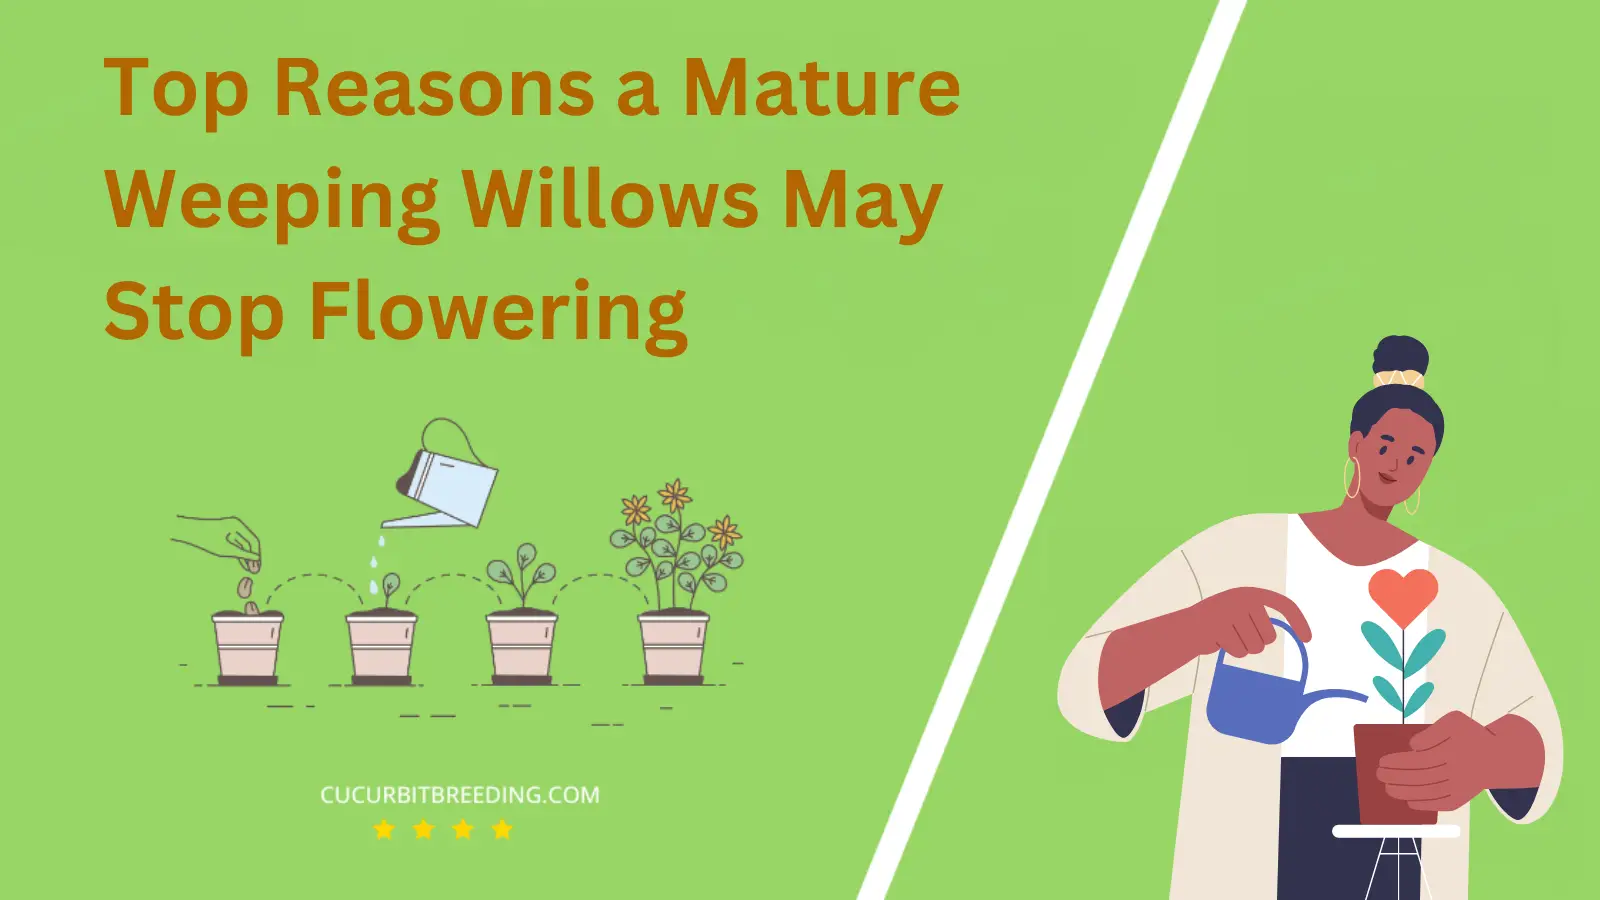 Top Reasons a Mature Weeping Willows May Stop Flowering